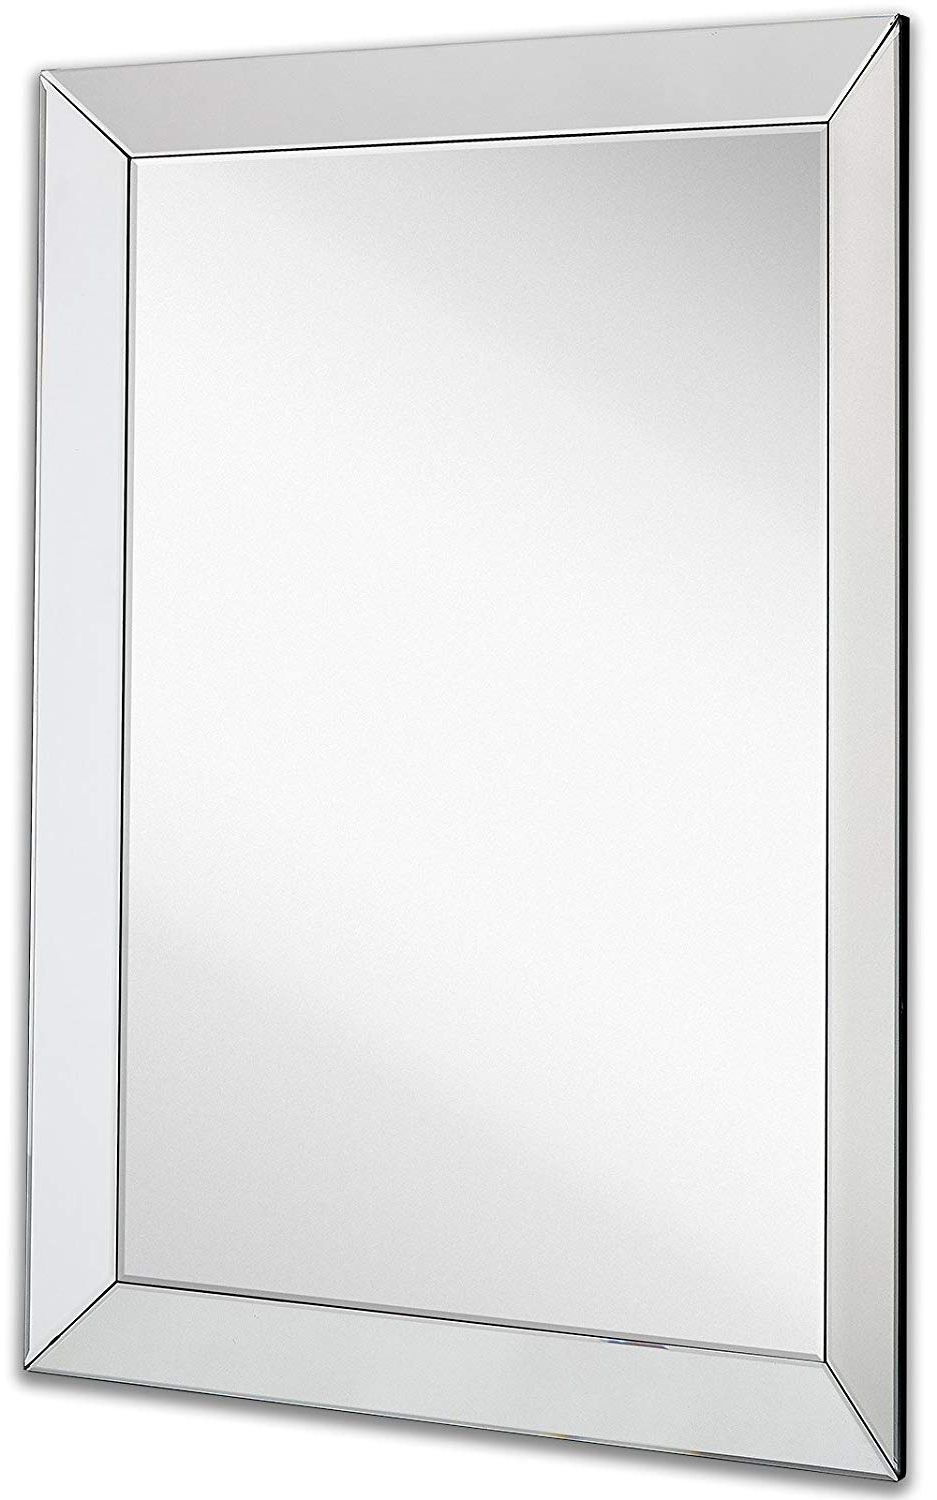 Wall Mirror With Mirror Frame Regarding Fashionable Large Framed Wall Mirror With 3 Inch Angled Beveled Mirror Frame (View 2 of 20)